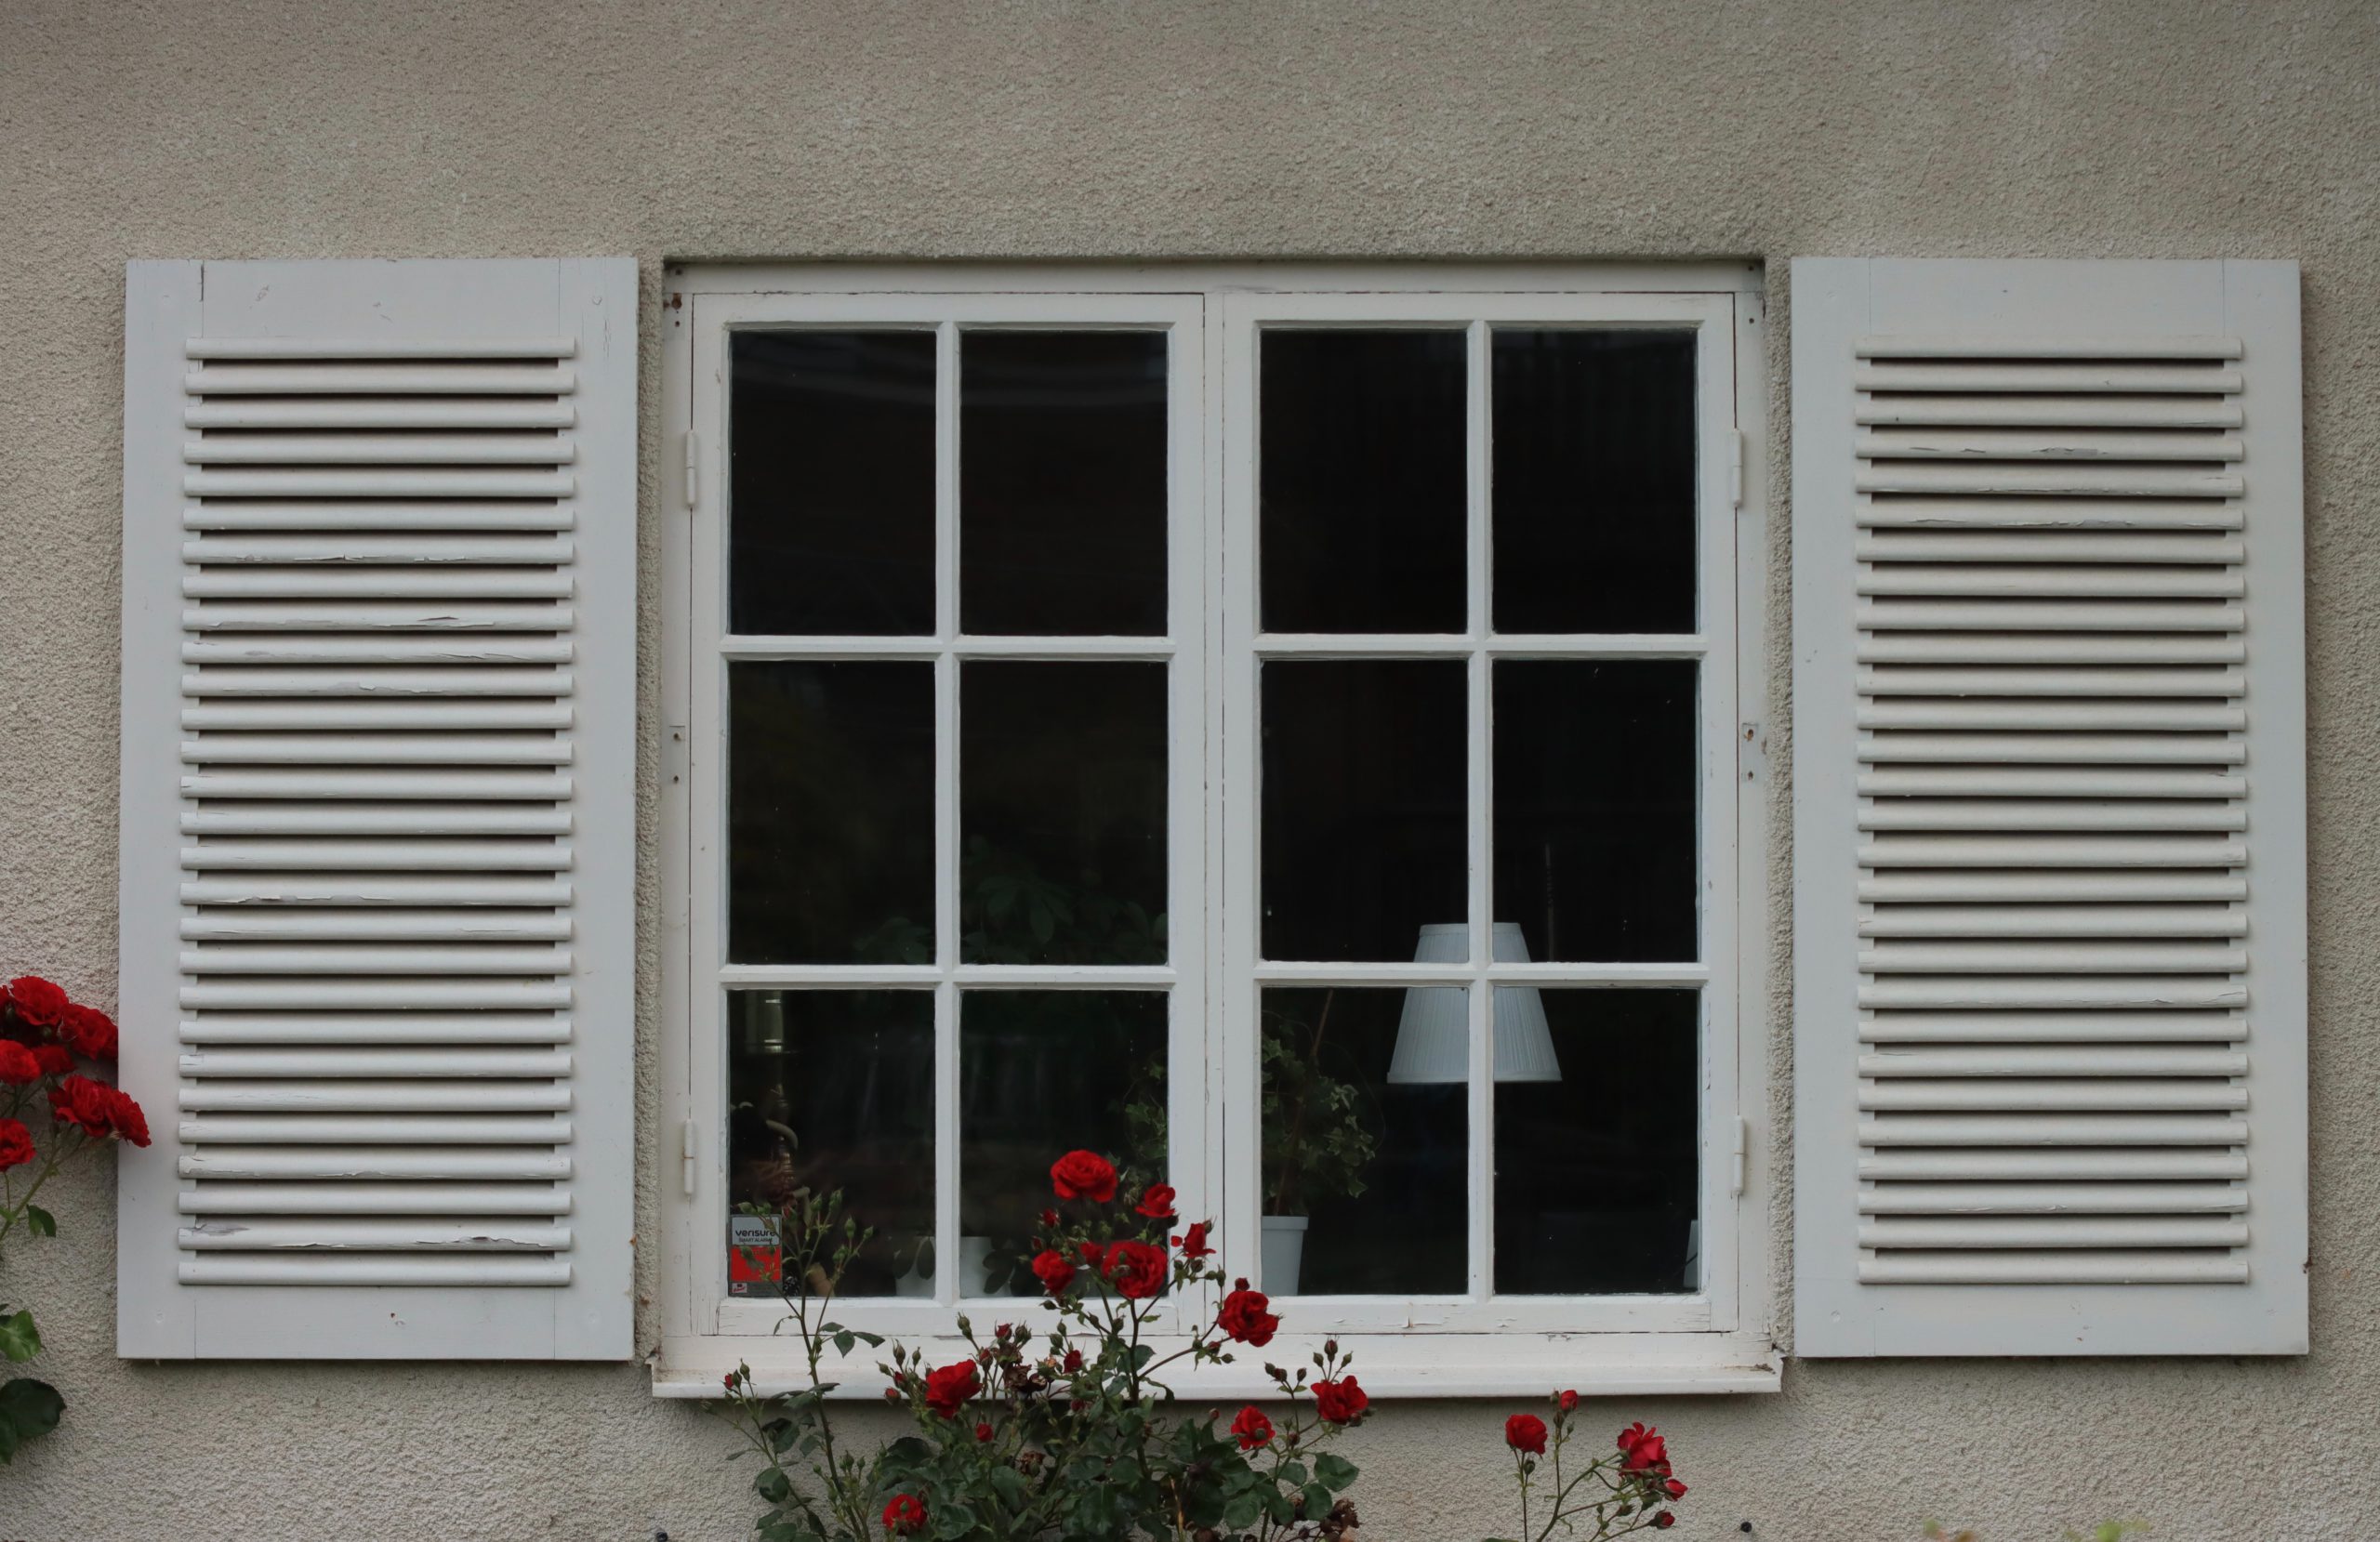 Exterior of a home with window visible with white shutters and a rose plant underneath the window